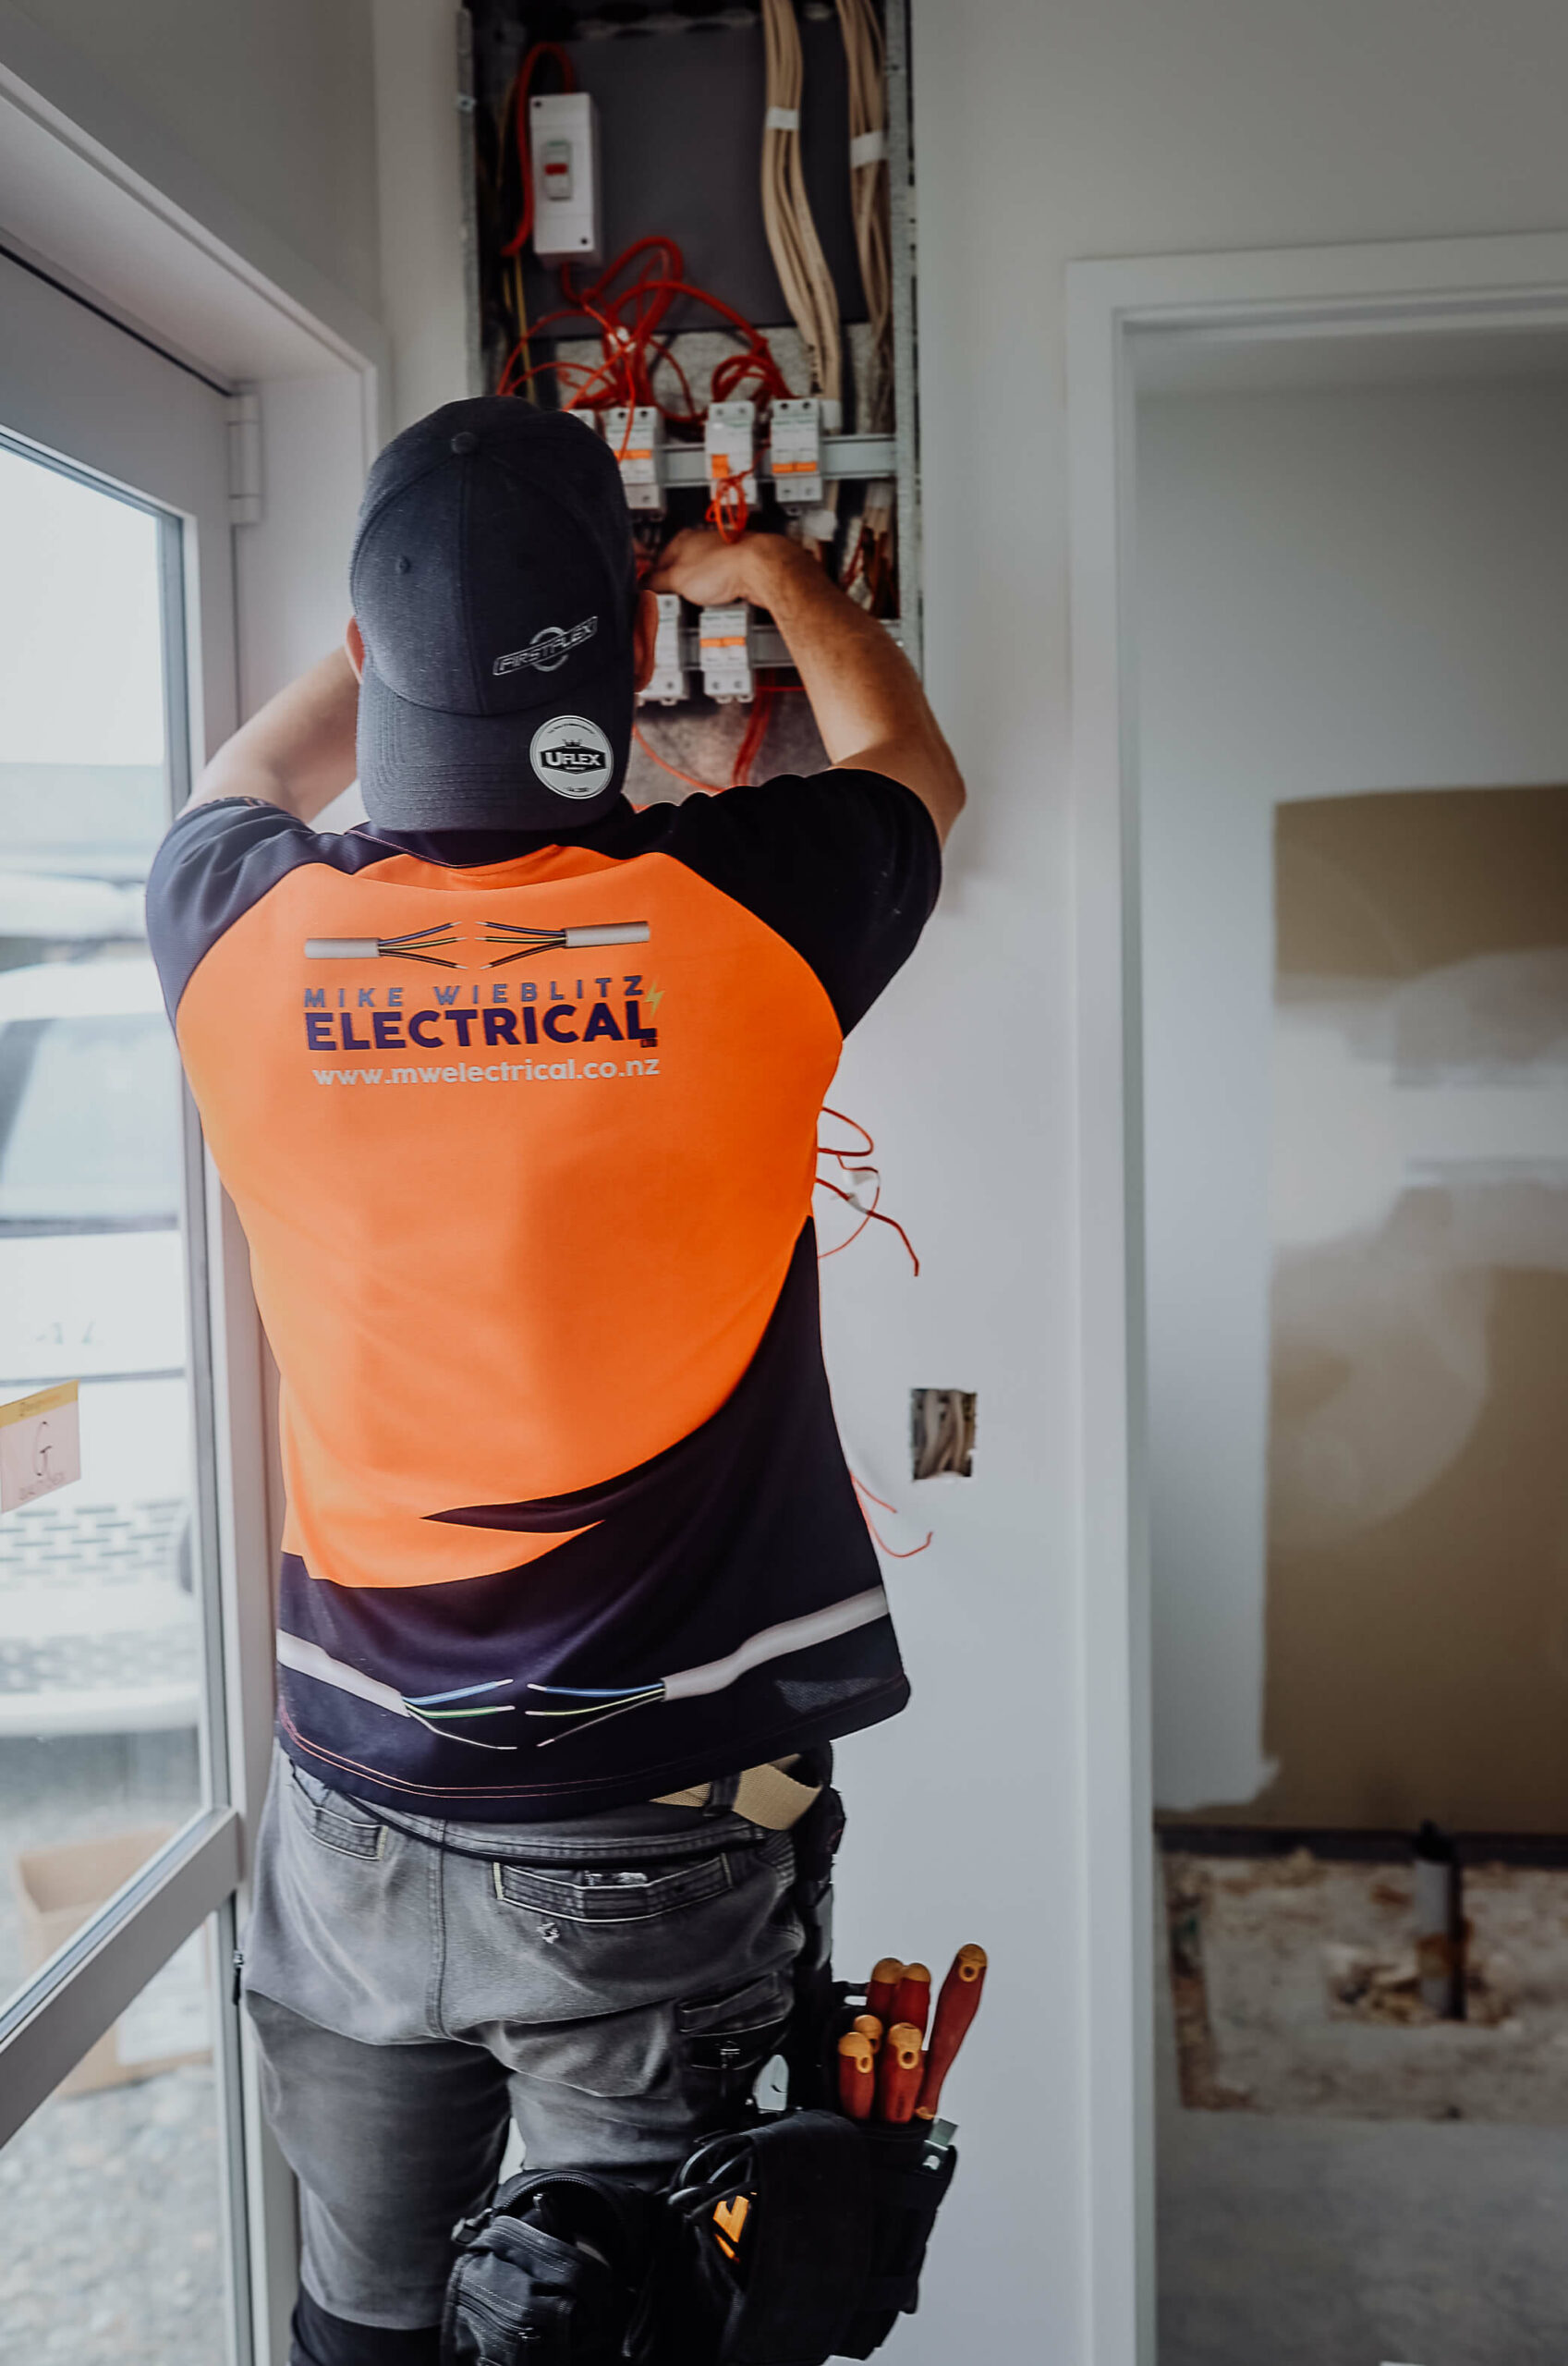 A man working on an electrical panel in a house.